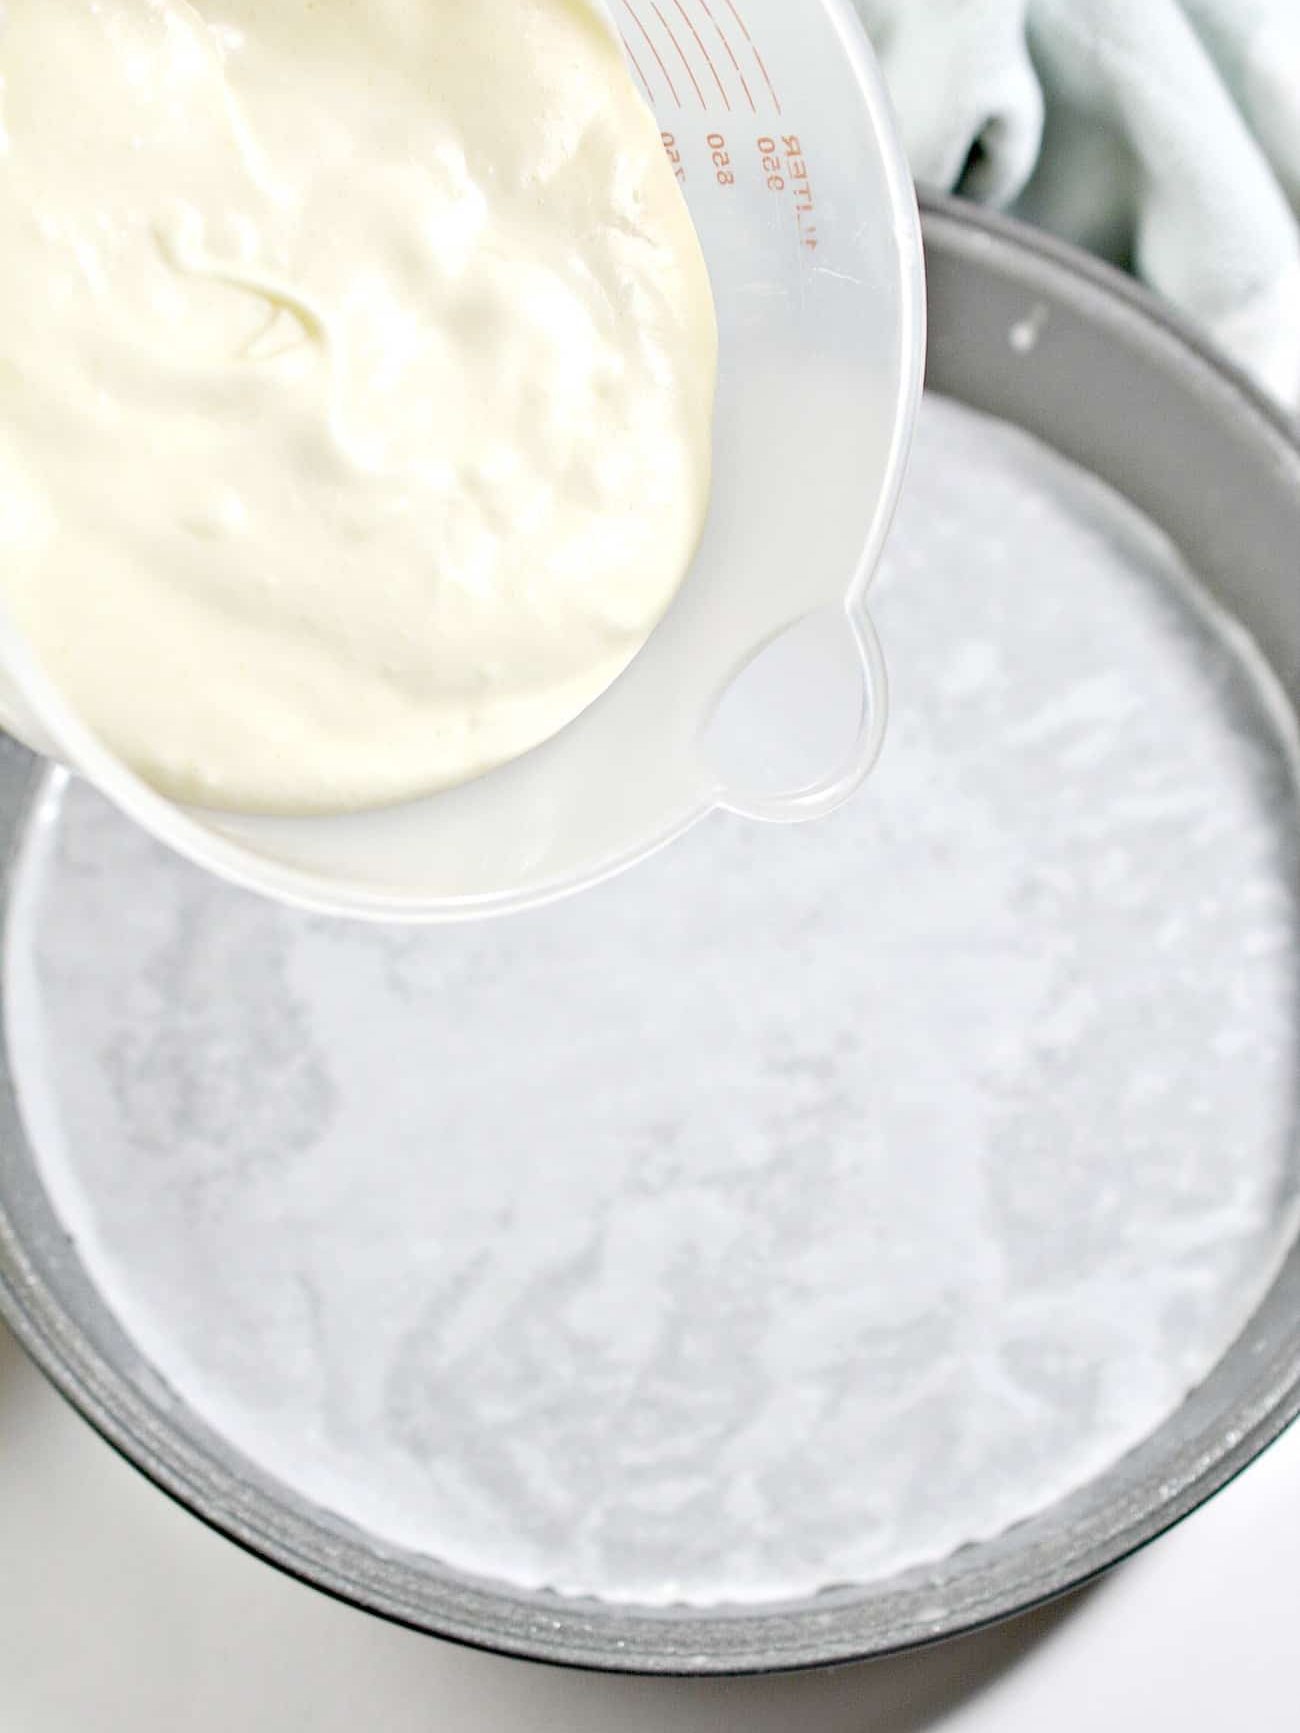 Separate the mixture into 2 well-greased 9-inch cake pans.